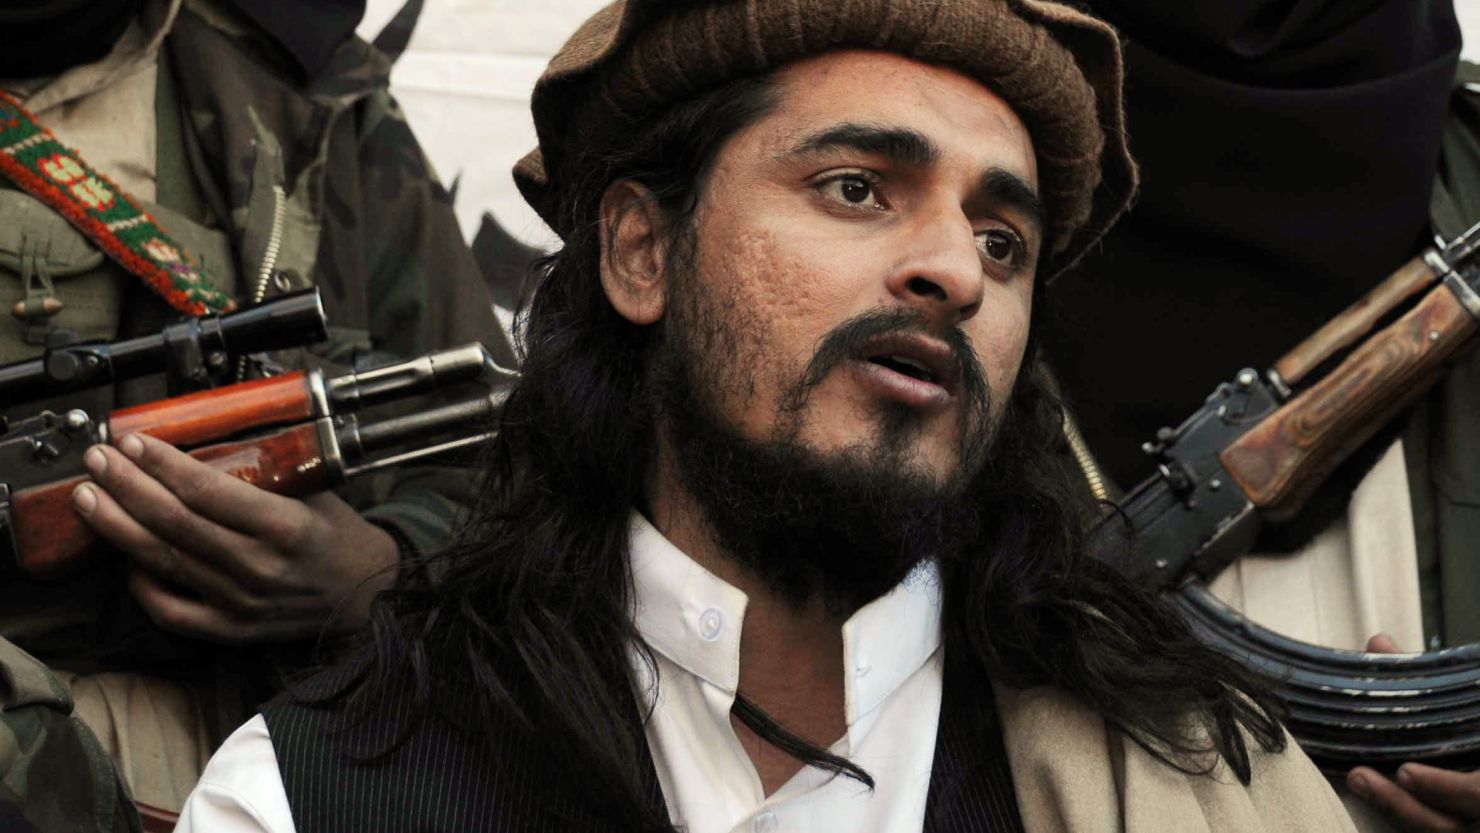 Former Tehreek-e-Taliban Pakistan chief Hakimullah Mehsud, who was killed in a drone strike on Friday.